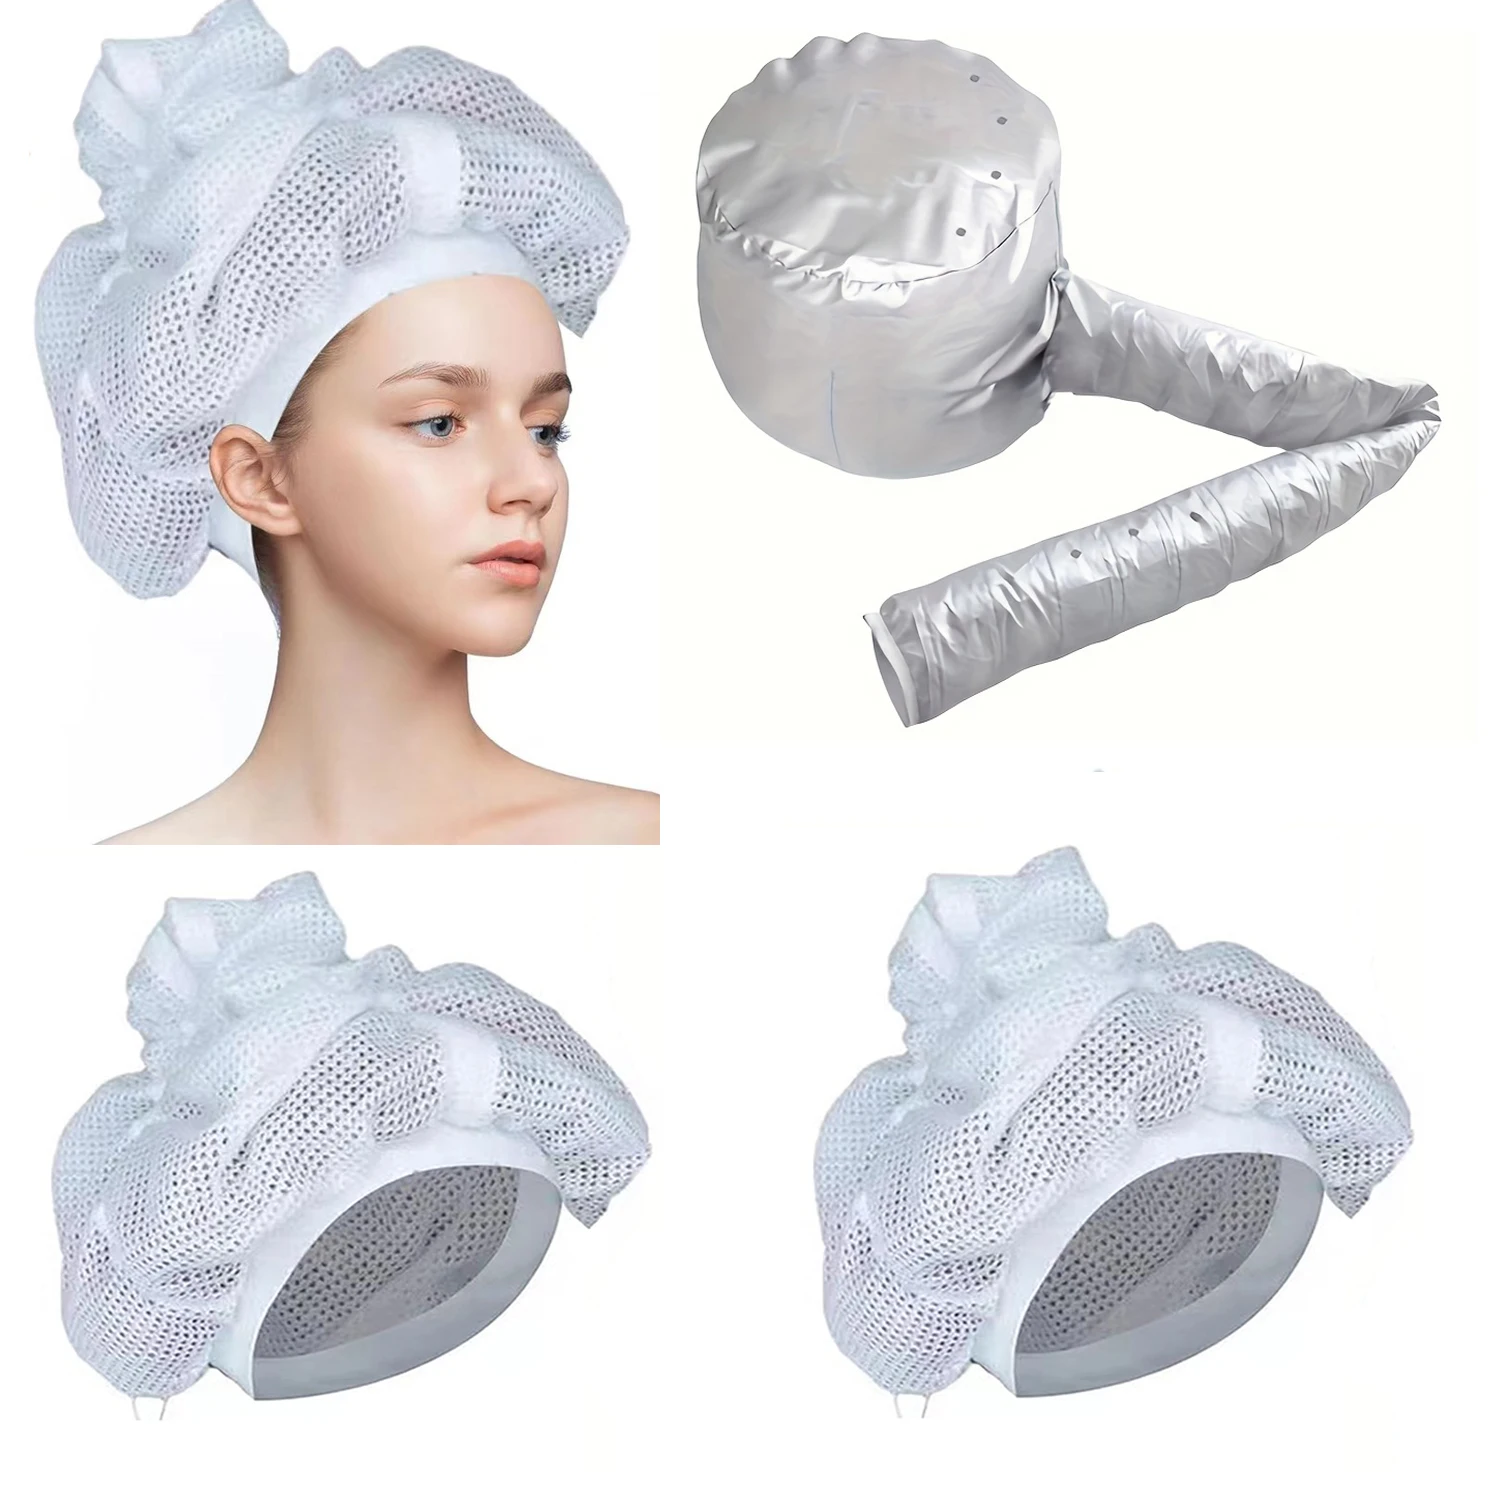 Net Plopping Cap For Drying Curly Hair With Drawstring Adjustable Large Hair Bonnet Mesh Hair Drying Soulta Net Plopping Bonnet